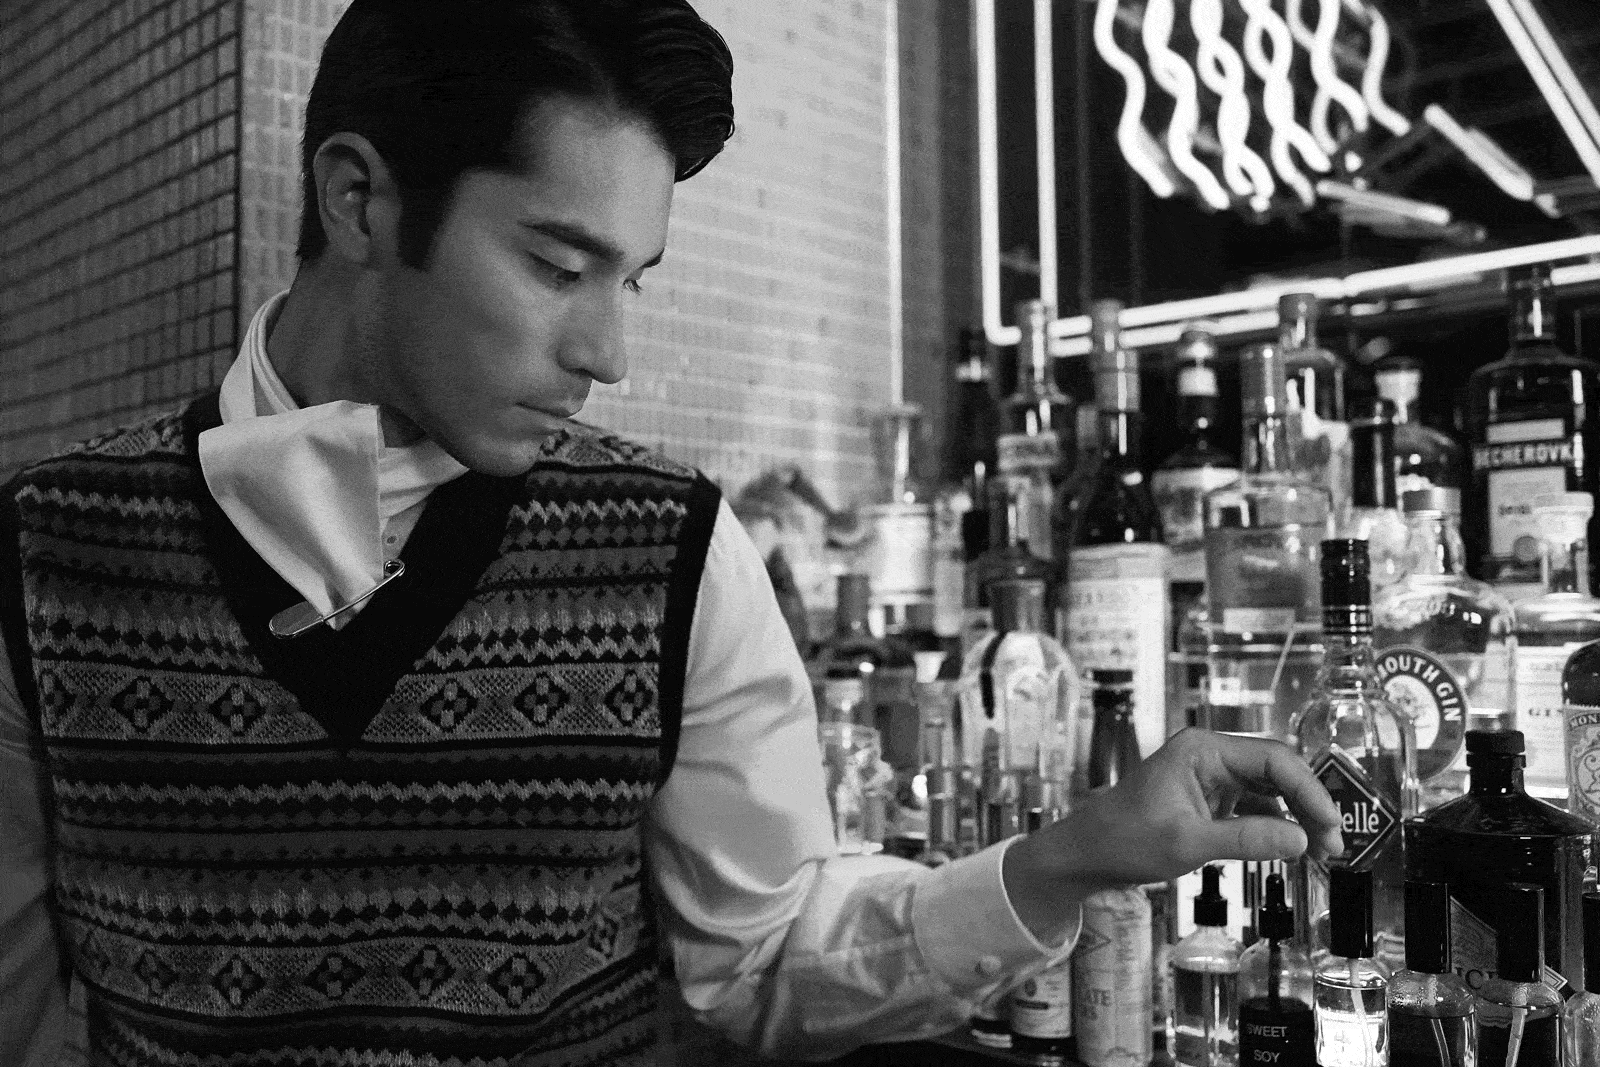 A model wearing Burberry reaches for a bottle of liquor in a neon-lit bar